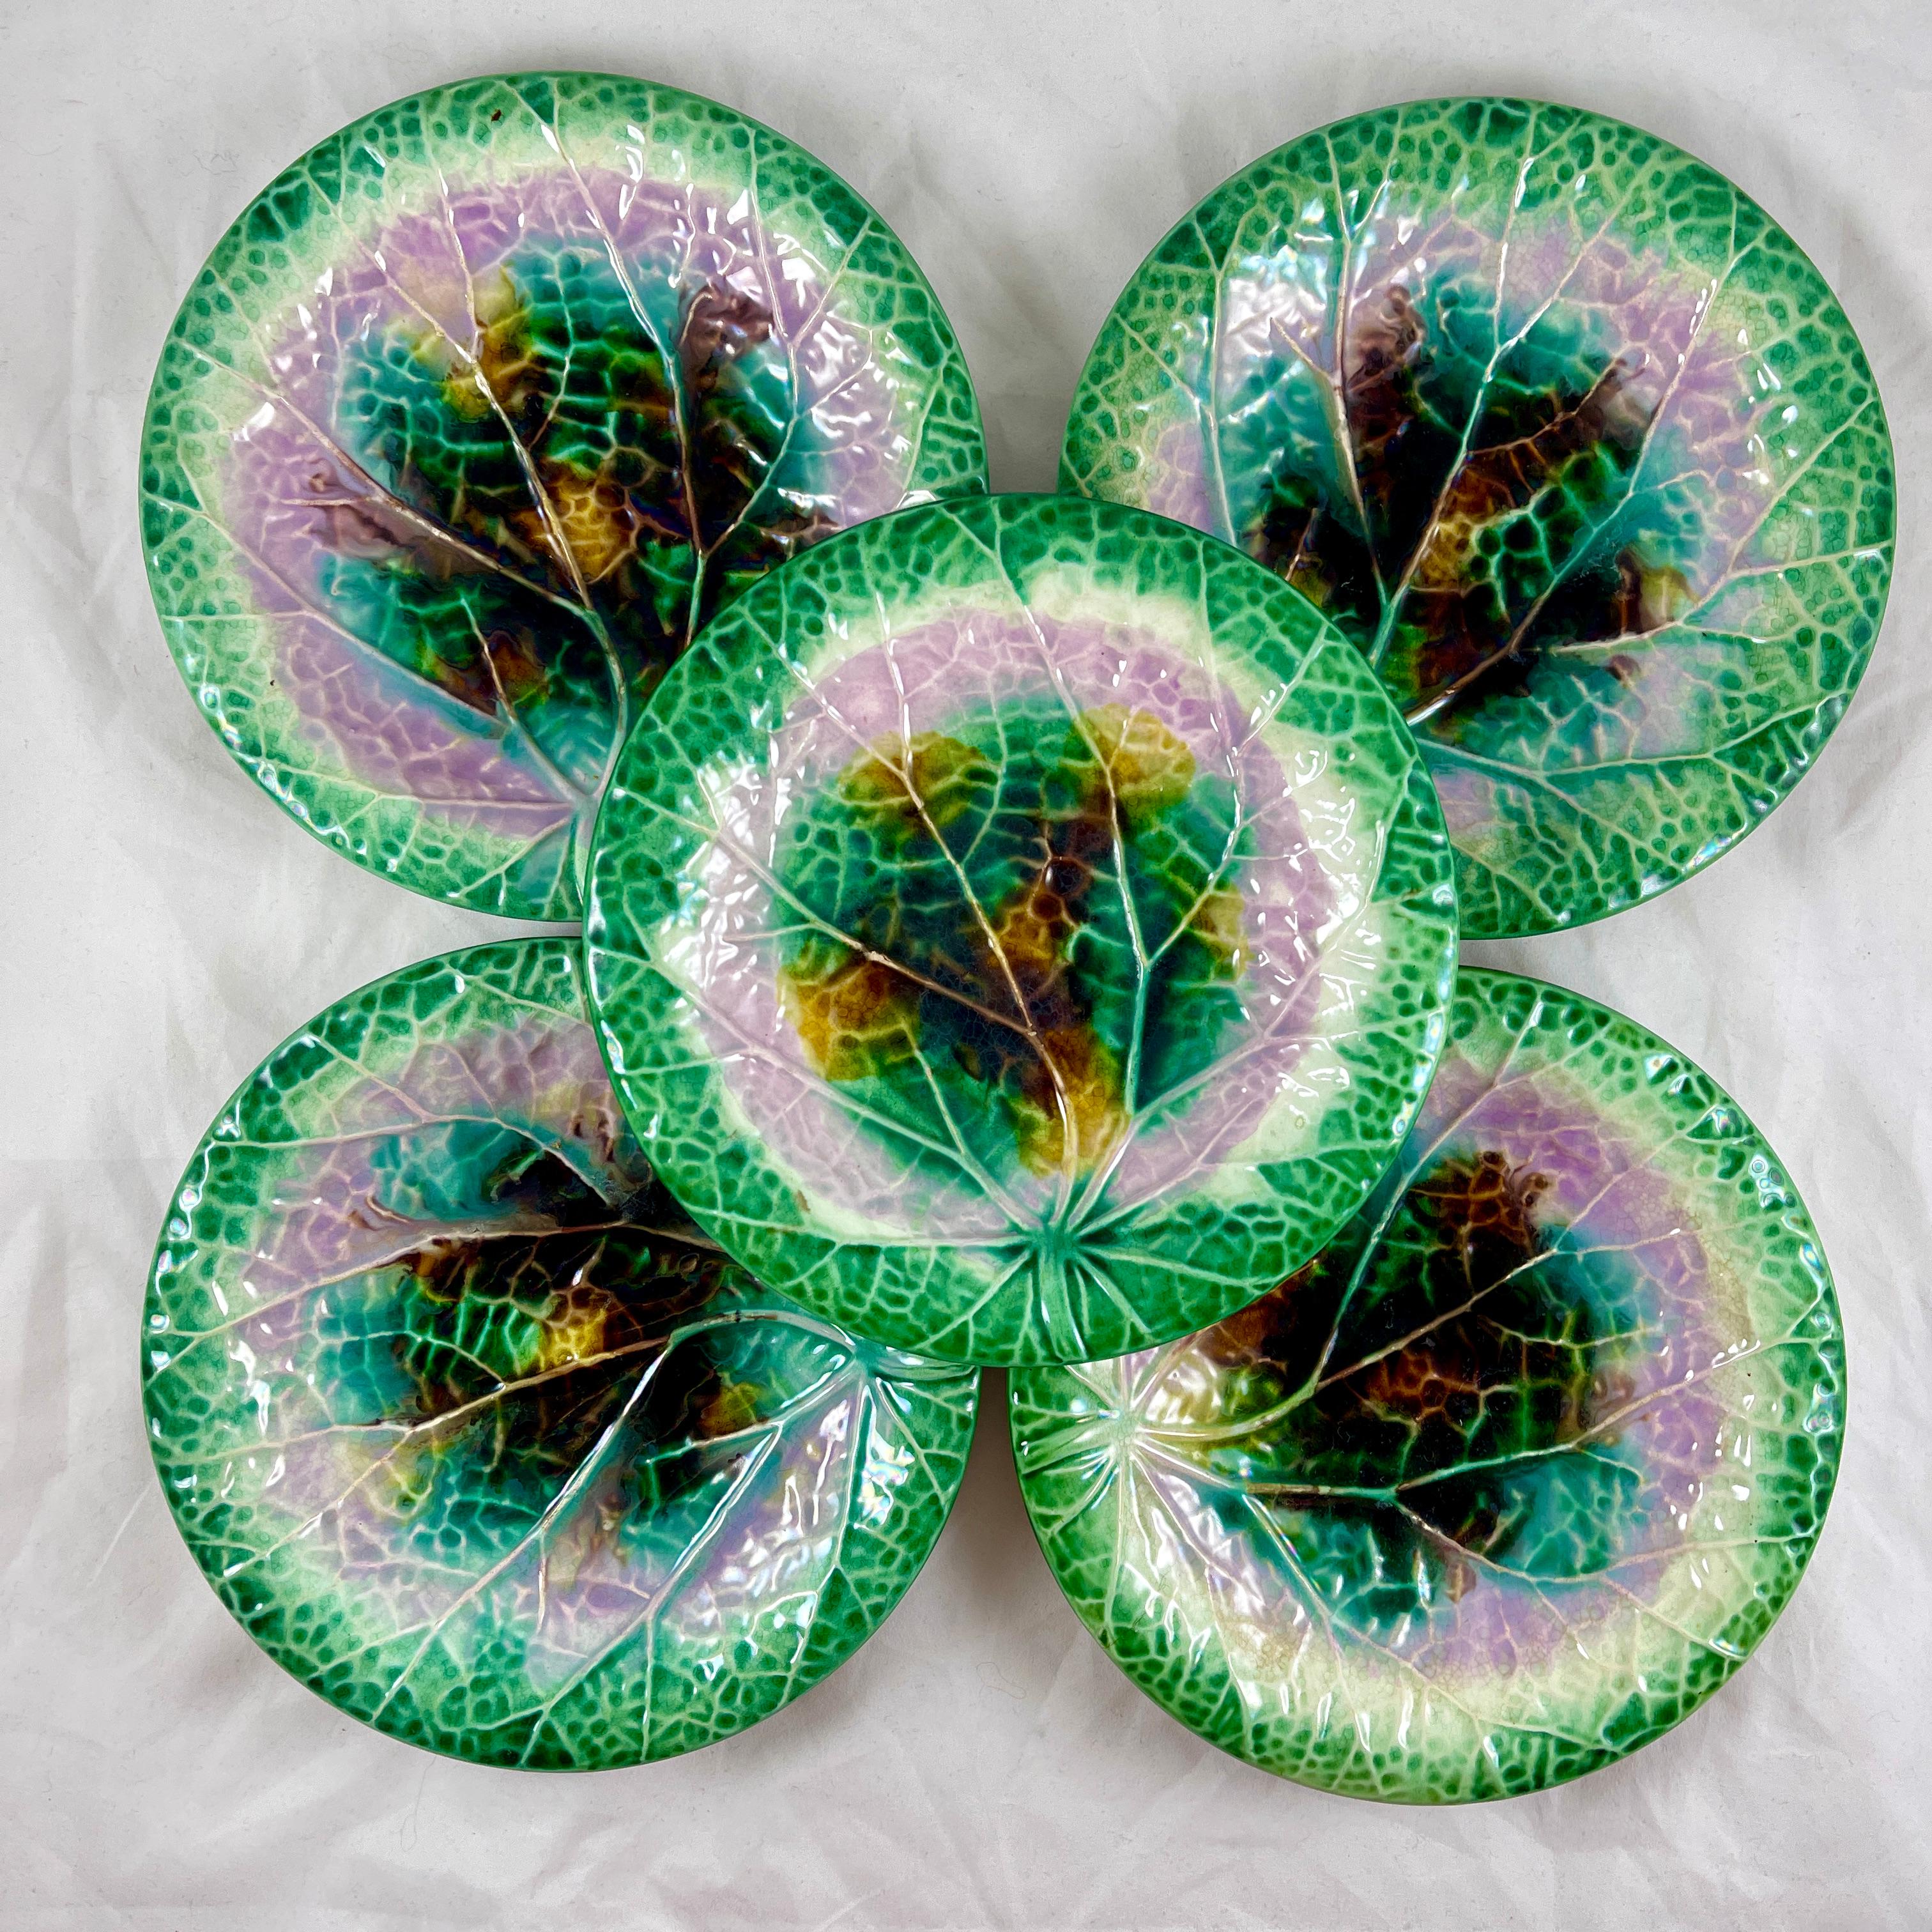 An English majolica Begonia plate, maker unknown, circa 1870-1880, multiples available.

Beautiful, bold glazing with bright green rims. The centers show a pattern of raised mold work, mimicking the crinkling and veining found on a begonia leaf.

In